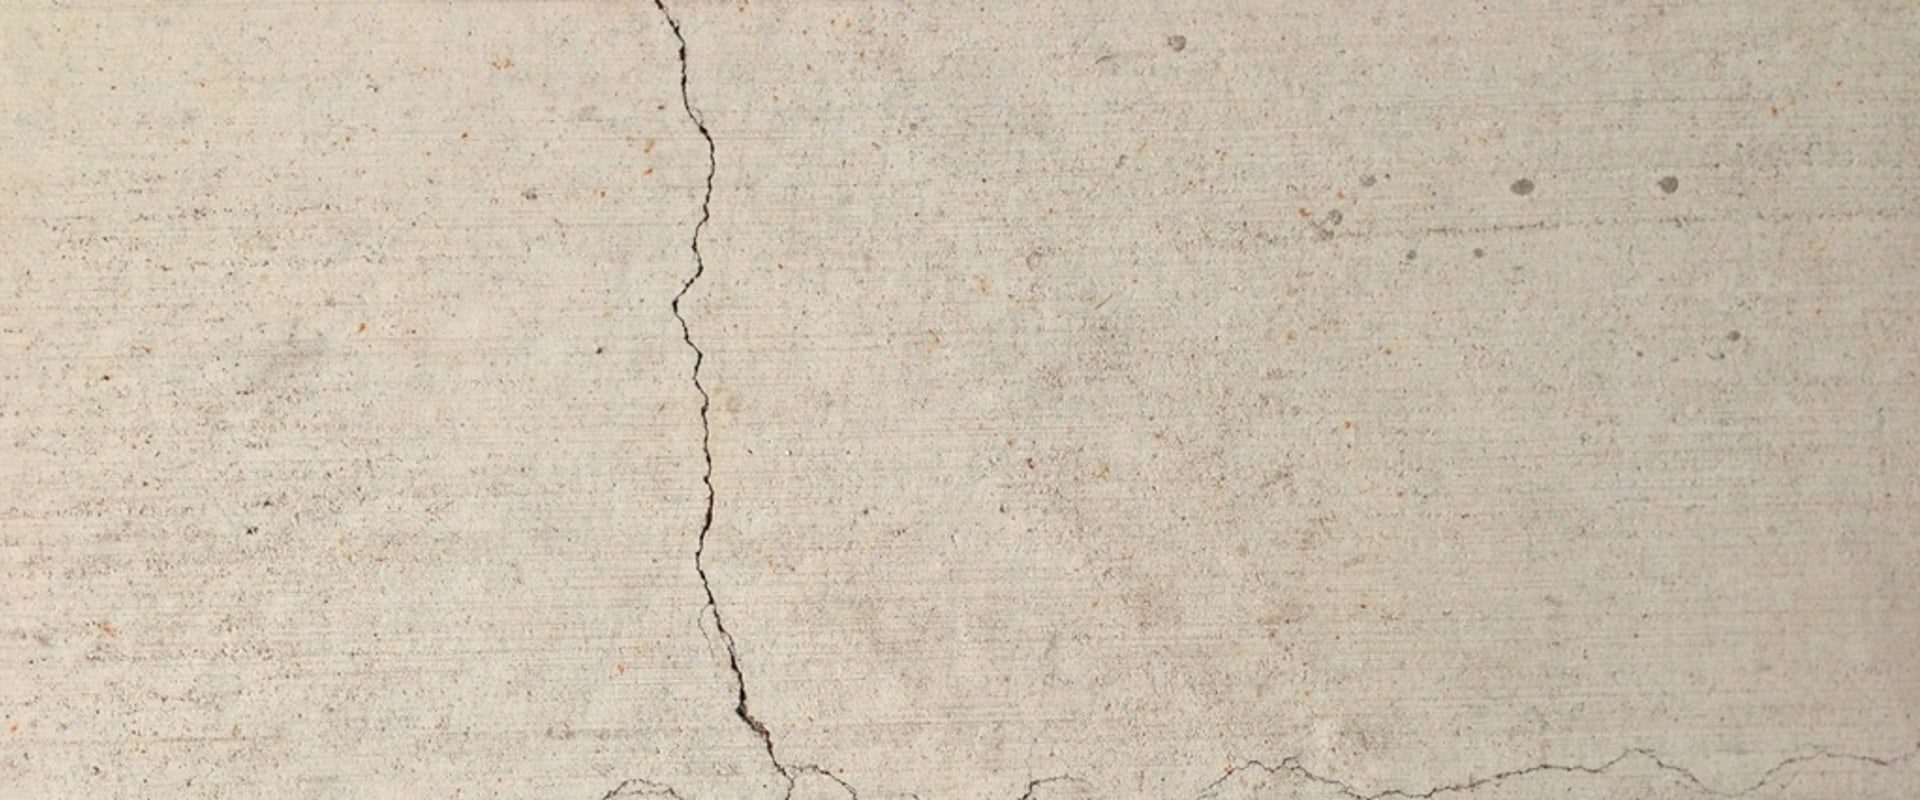 When Should I Worry About Cracks in the Concrete?